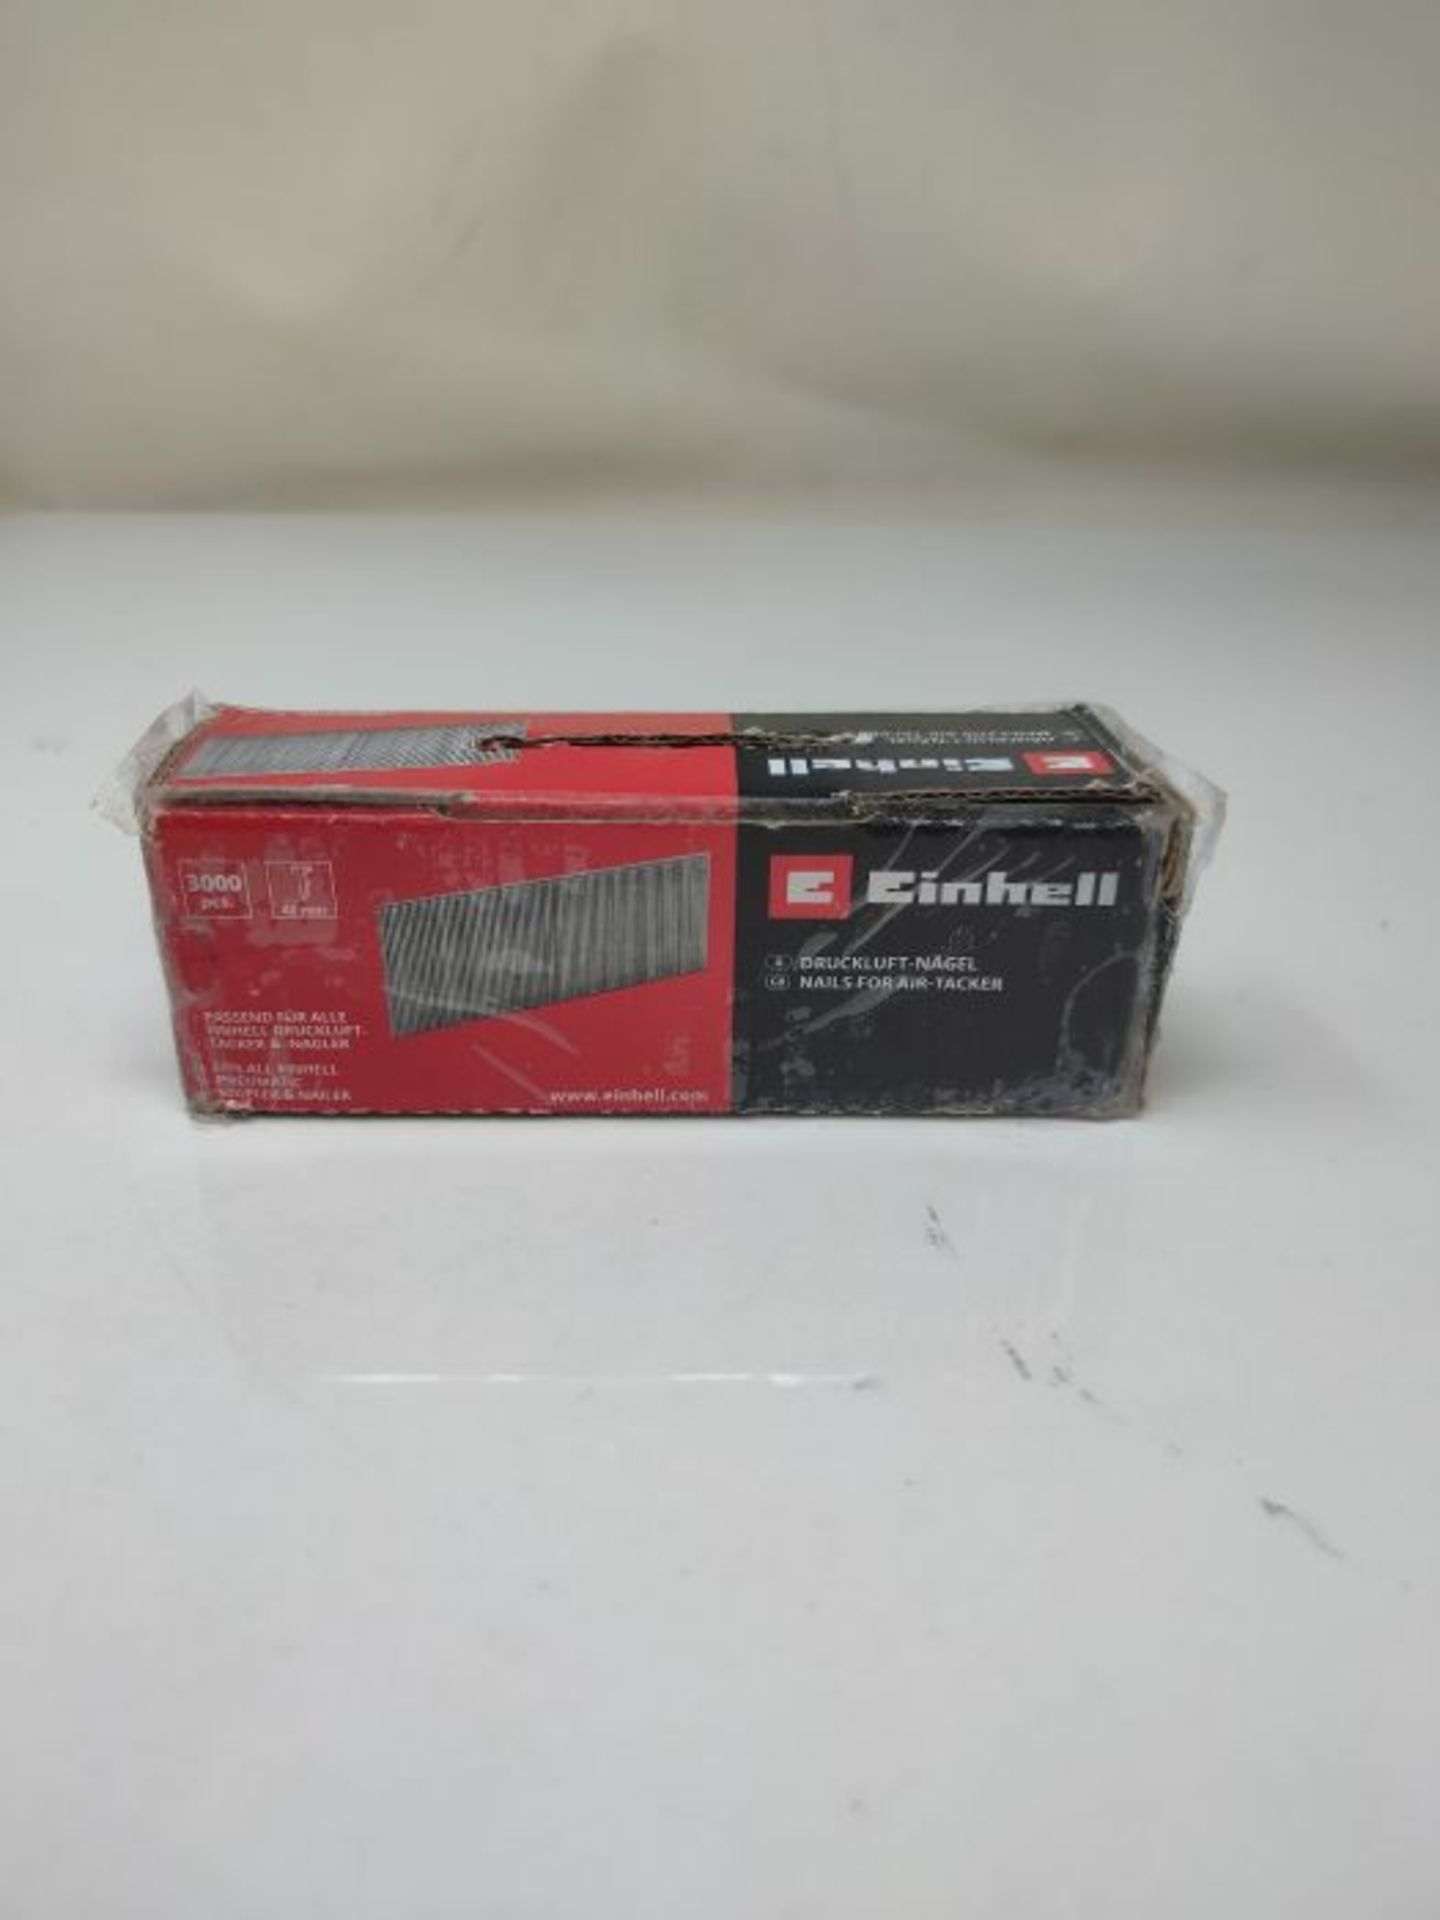 Einhell Nails 40 mm Set of 3000 for Pneumatic Stapler - Image 2 of 3